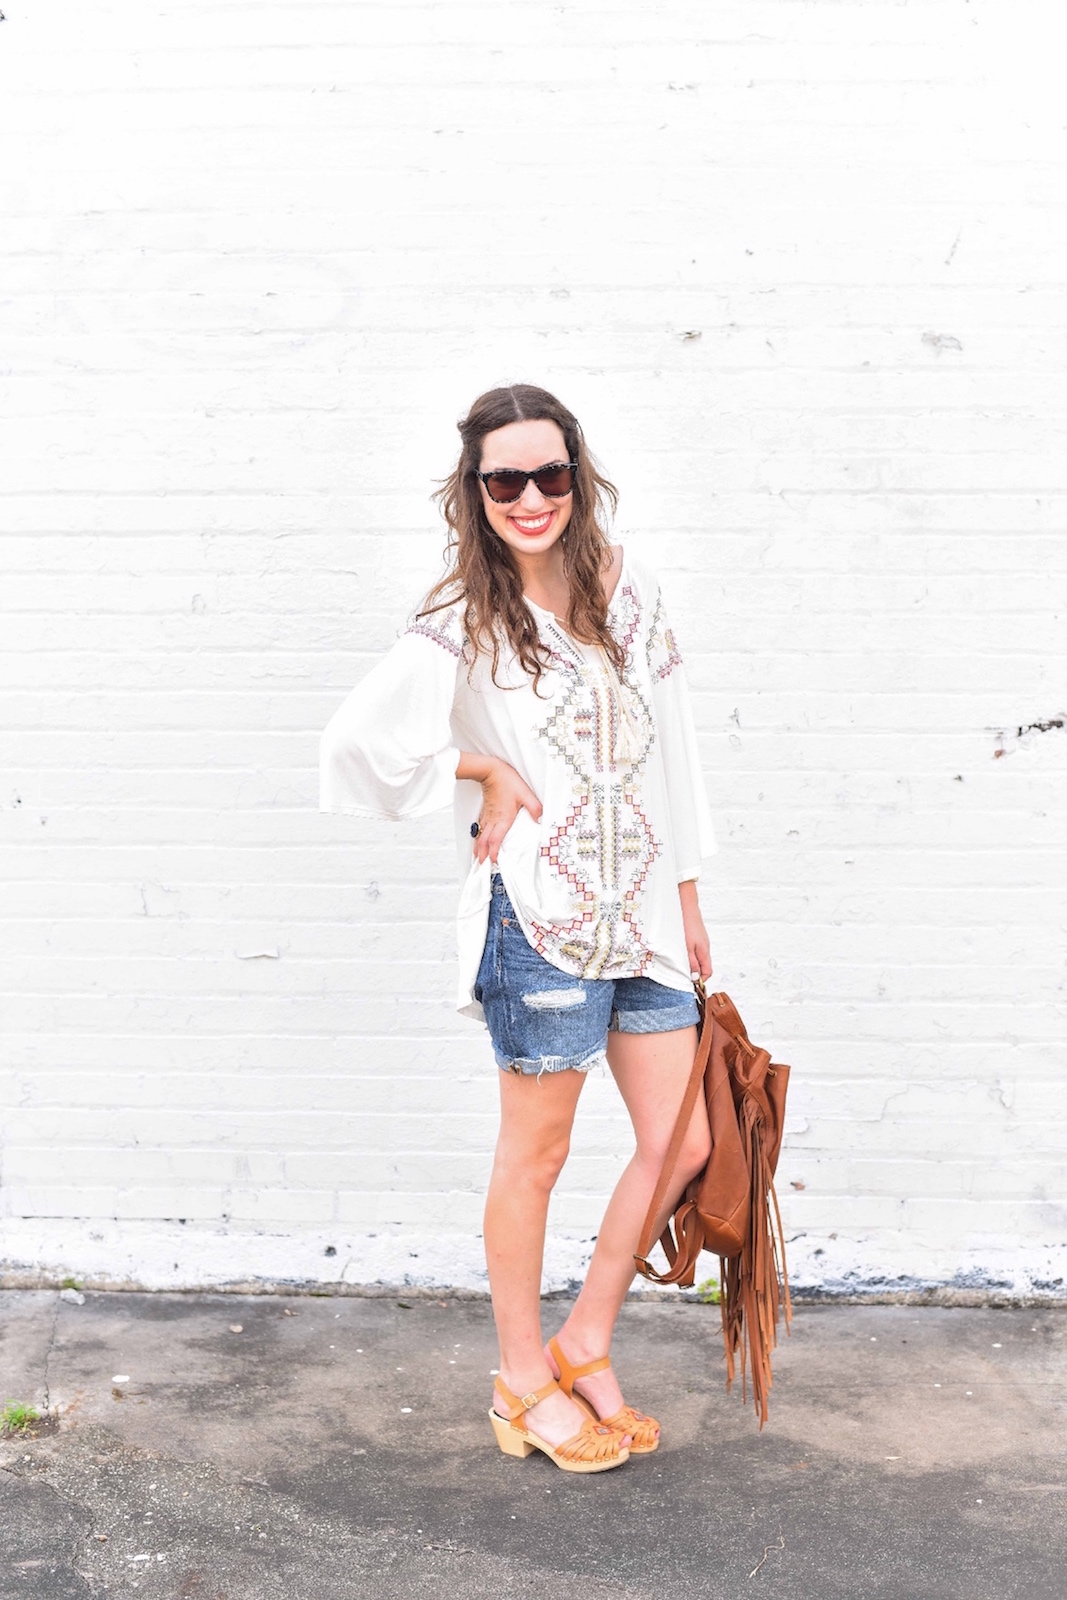 true religion fringe backpack, embroidered boho top, levis distressed shorts, lone star looking glass, houston fashion blogger, weekend outfit inspiration